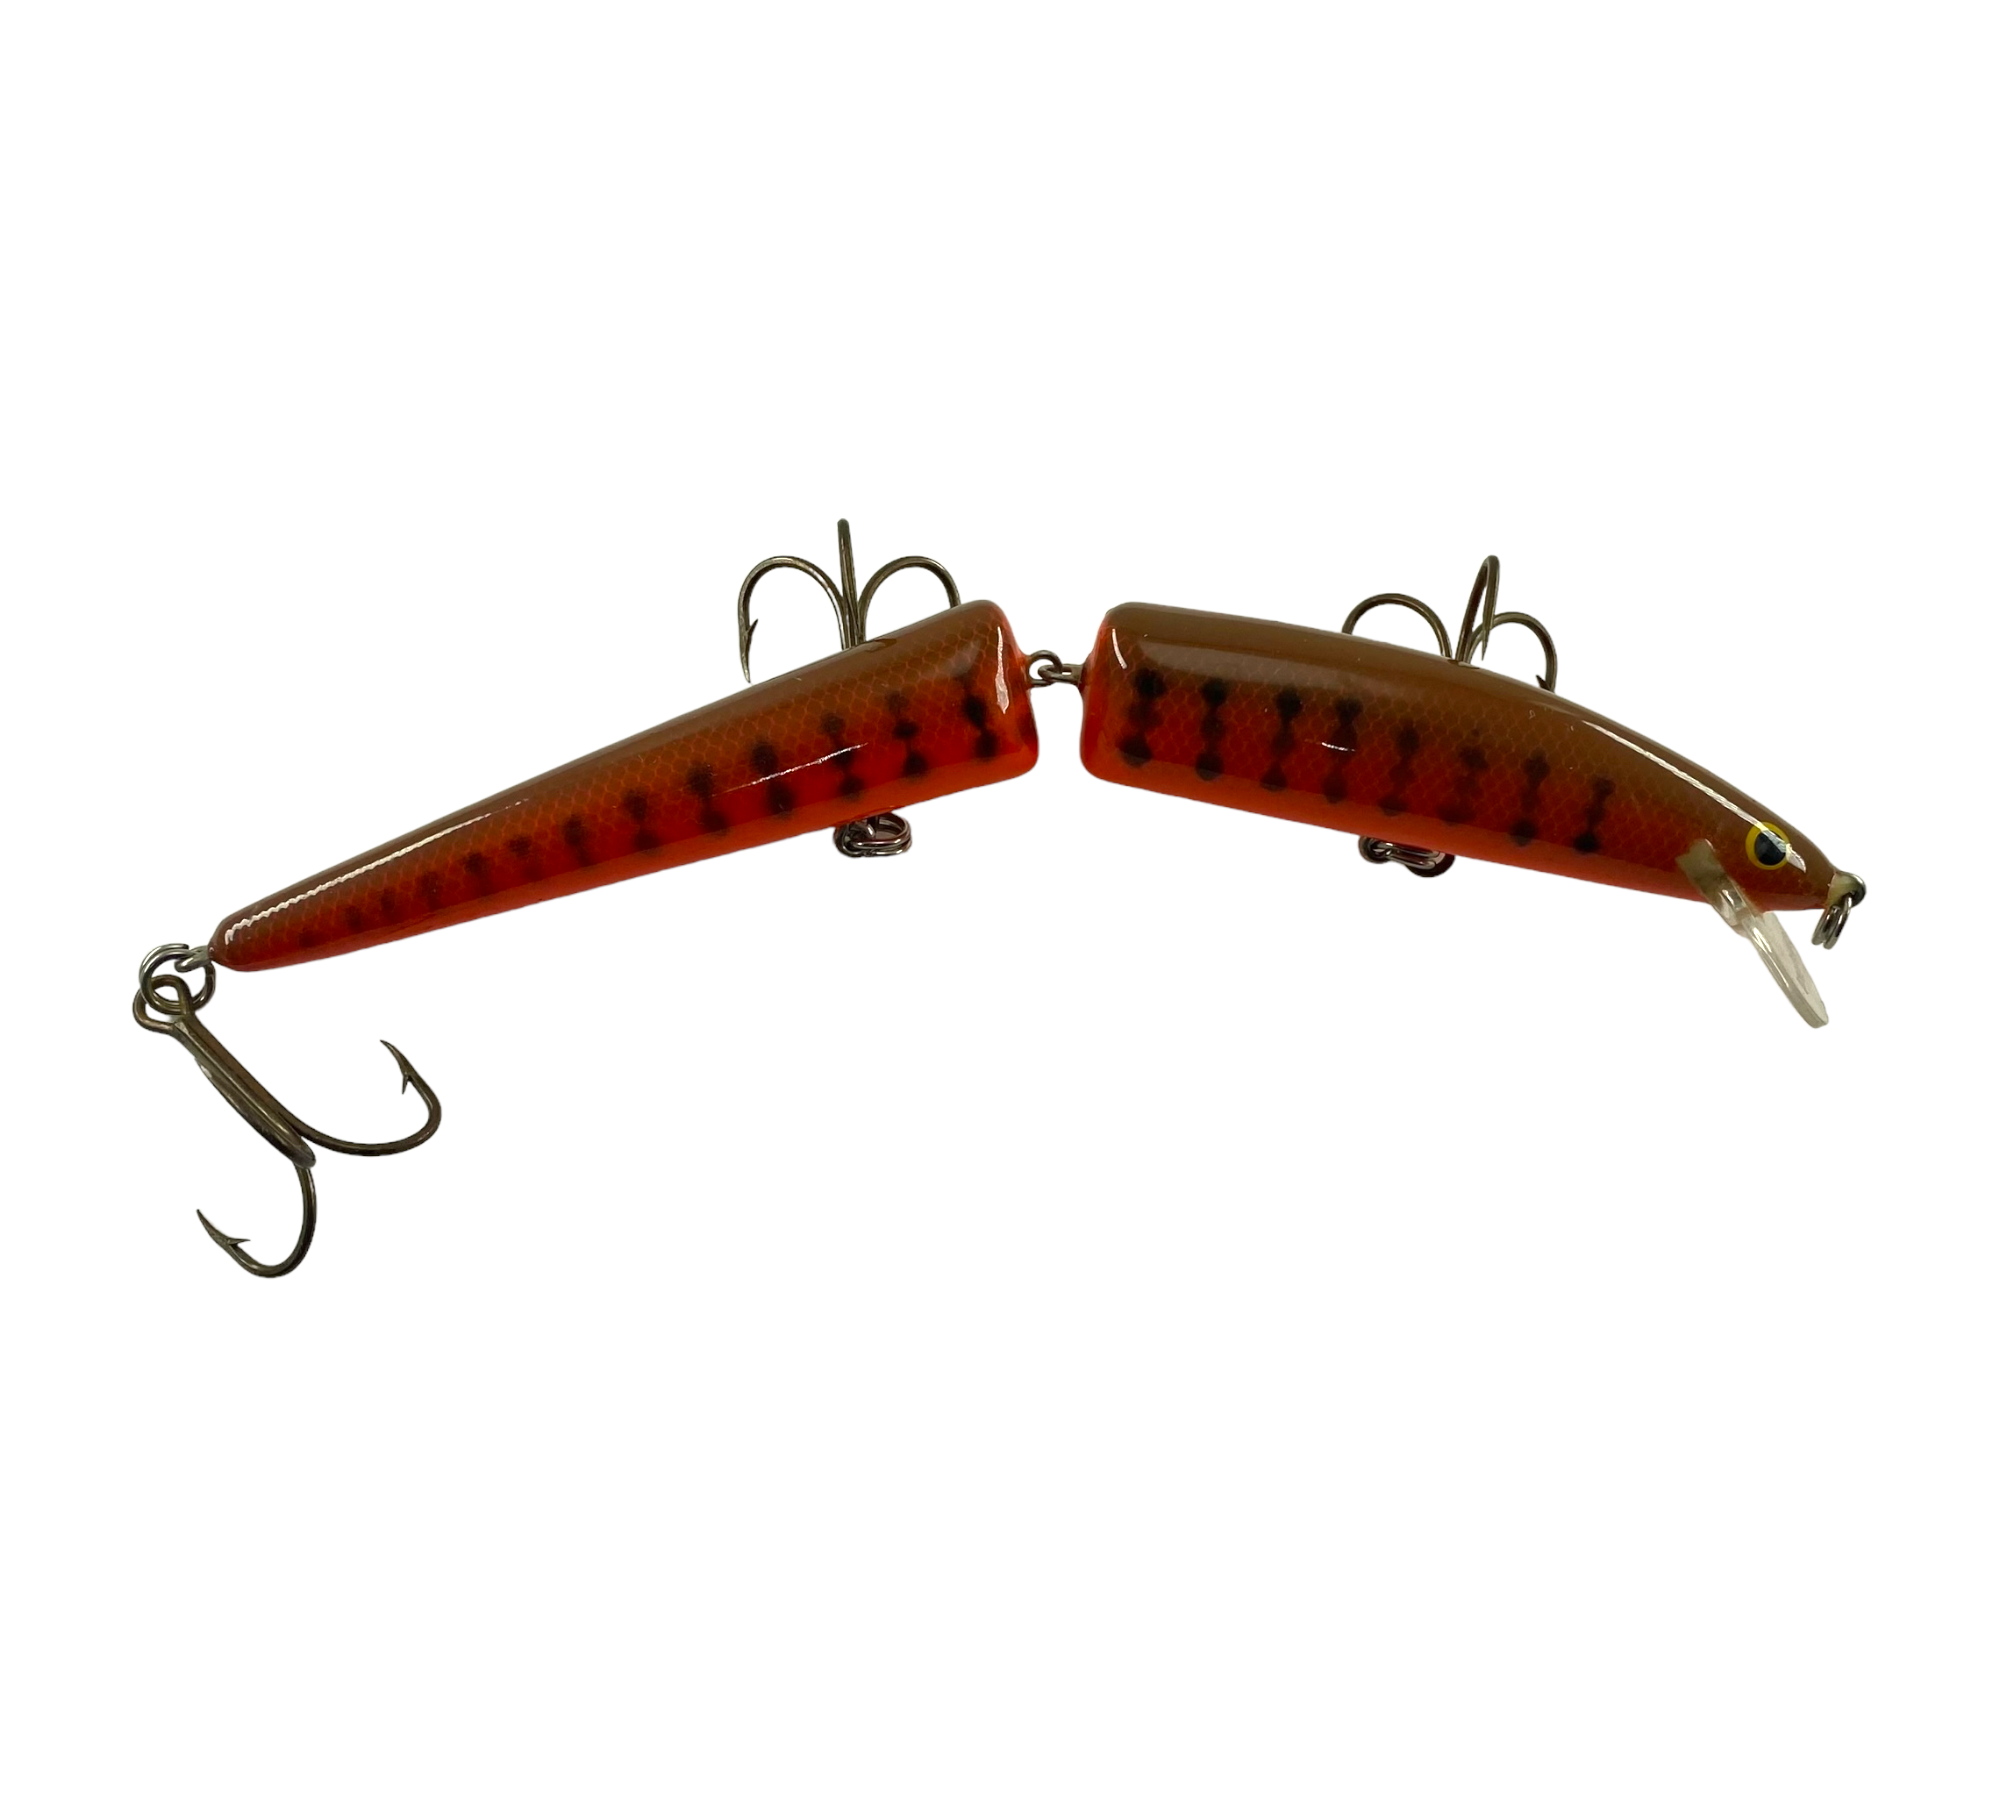 Bagley Baits Vintage Fishing Lures for sale